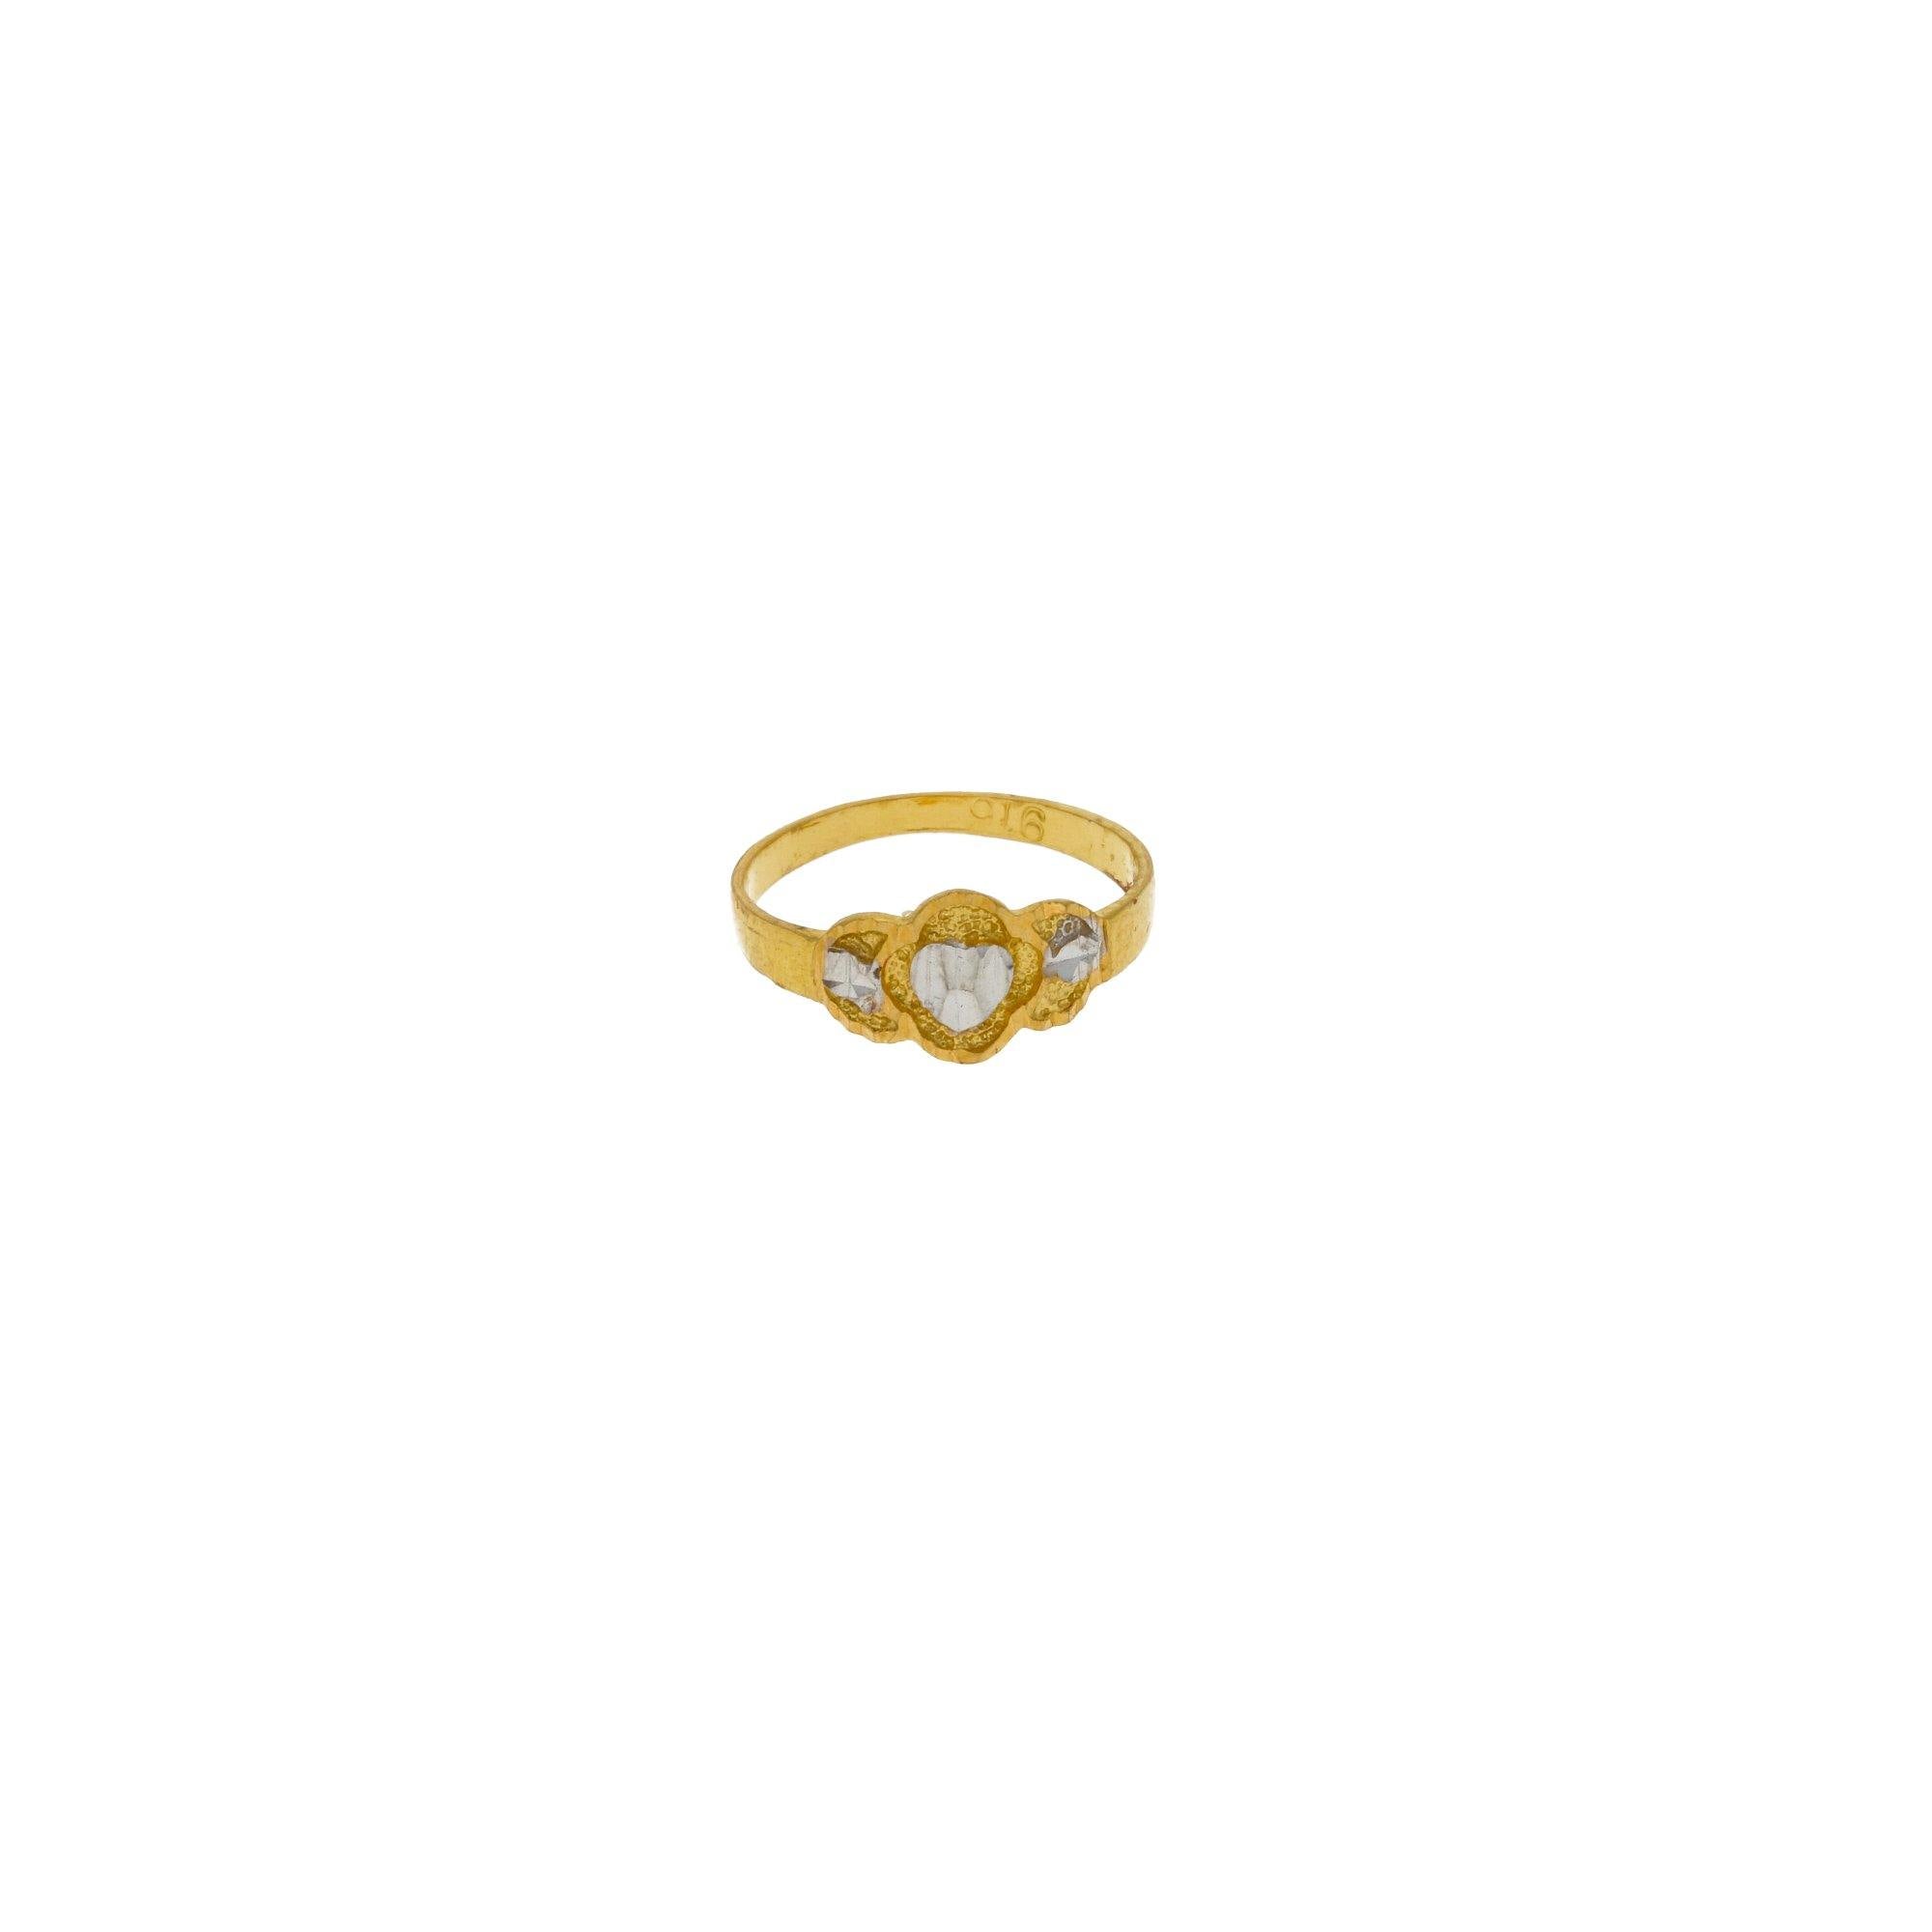 1 Gm Gold Ring For Baby | Gold Ring For Baby Boy With Price | Gold Ring For  Baby finger | Gold Ring - 22k Gold Finger Ring - shop Gold Rings